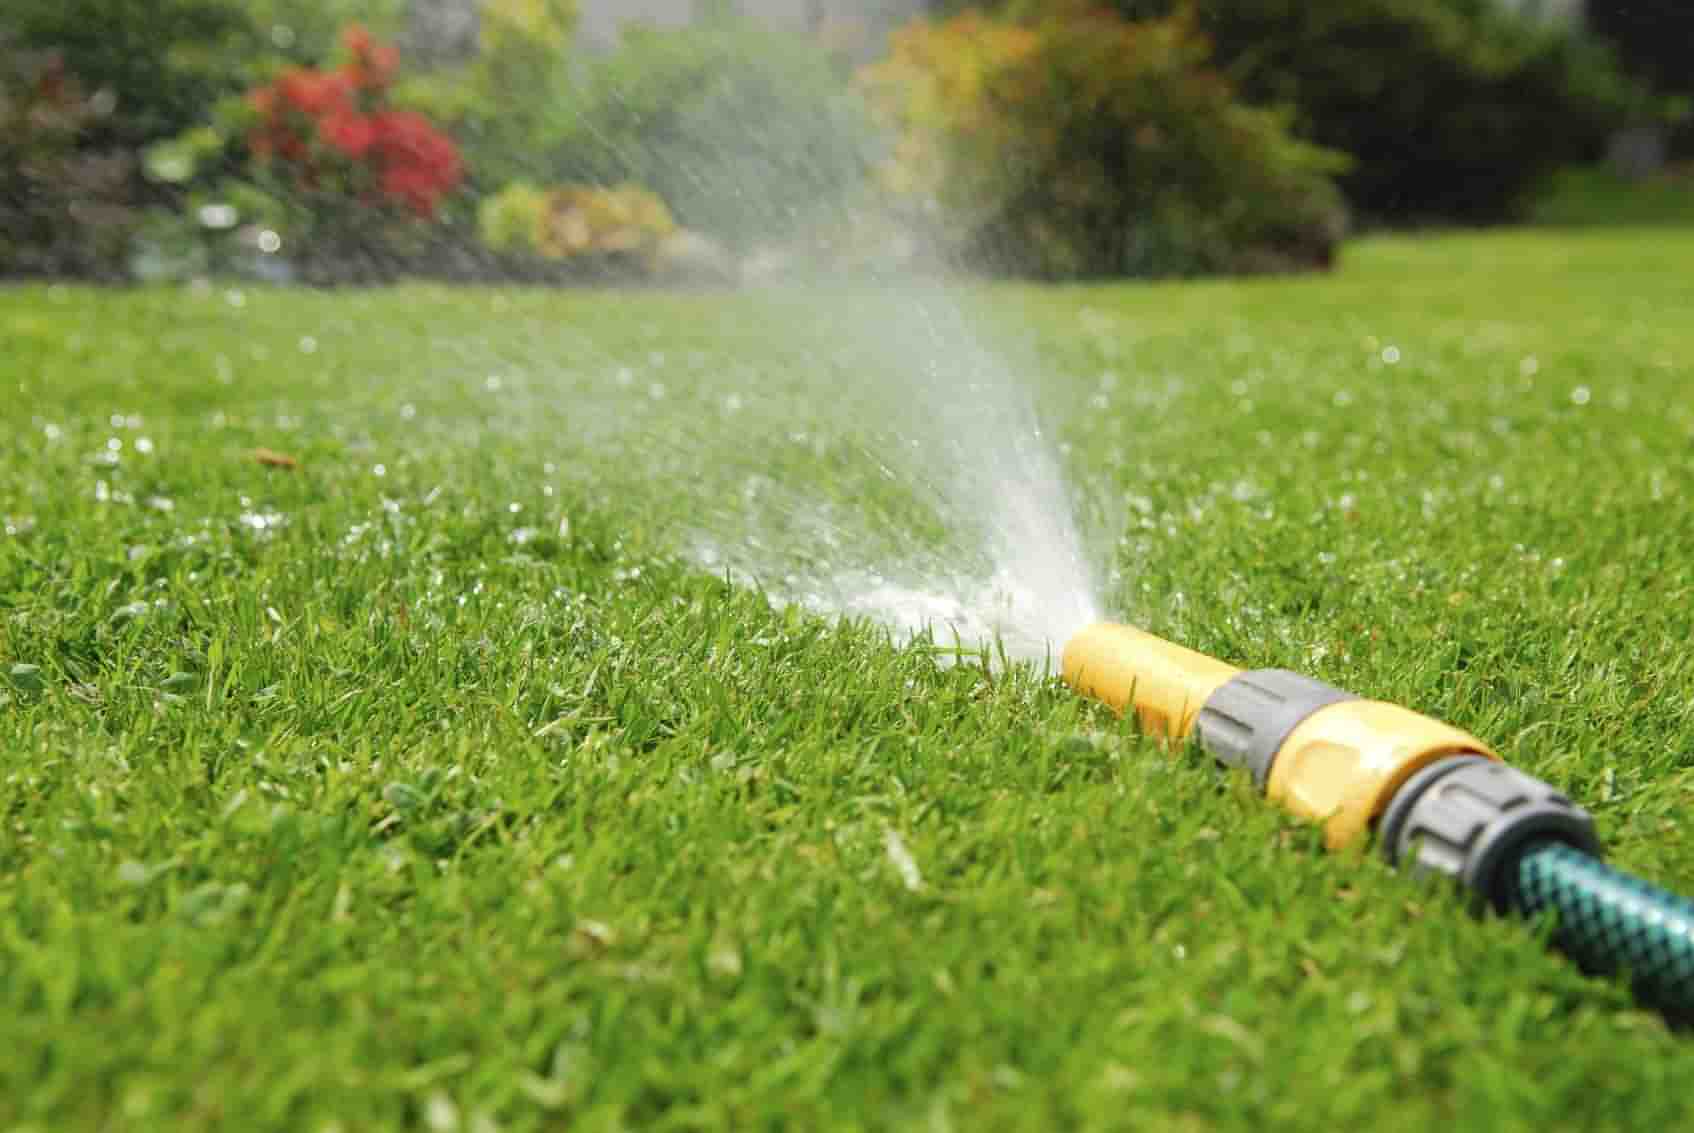 schedule watering, protect the lawn in winter